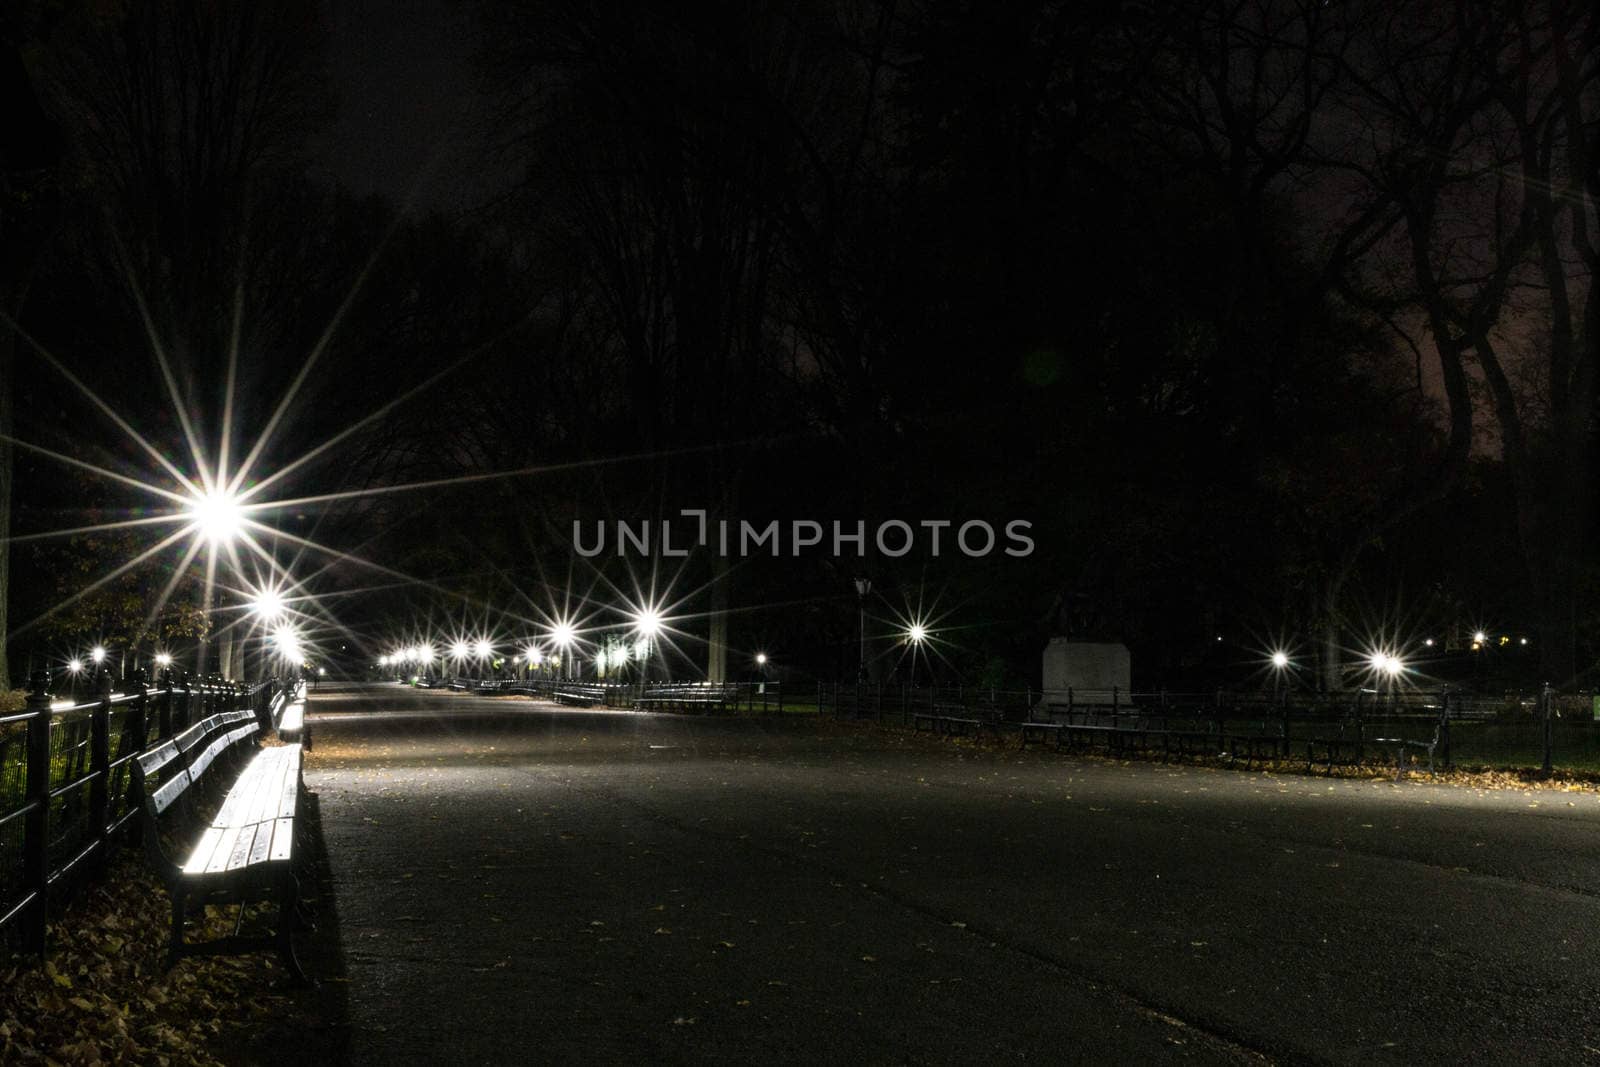 The Mall of Central park at night by rmbarricarte